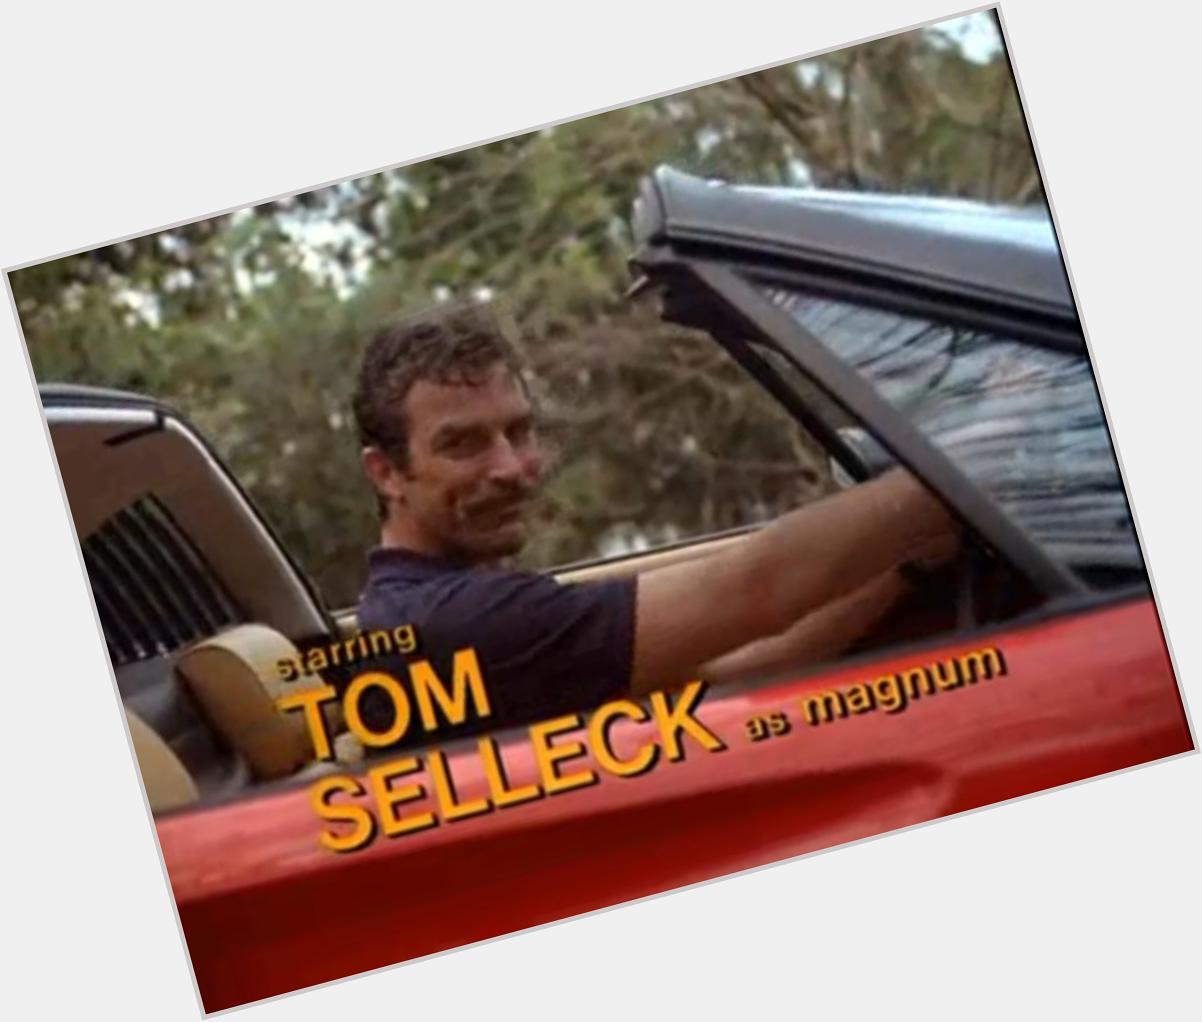 Happy 70th Birthday Tom Selleck - Best looking man with a mustache! Loved Magnum P.I. growing up. 